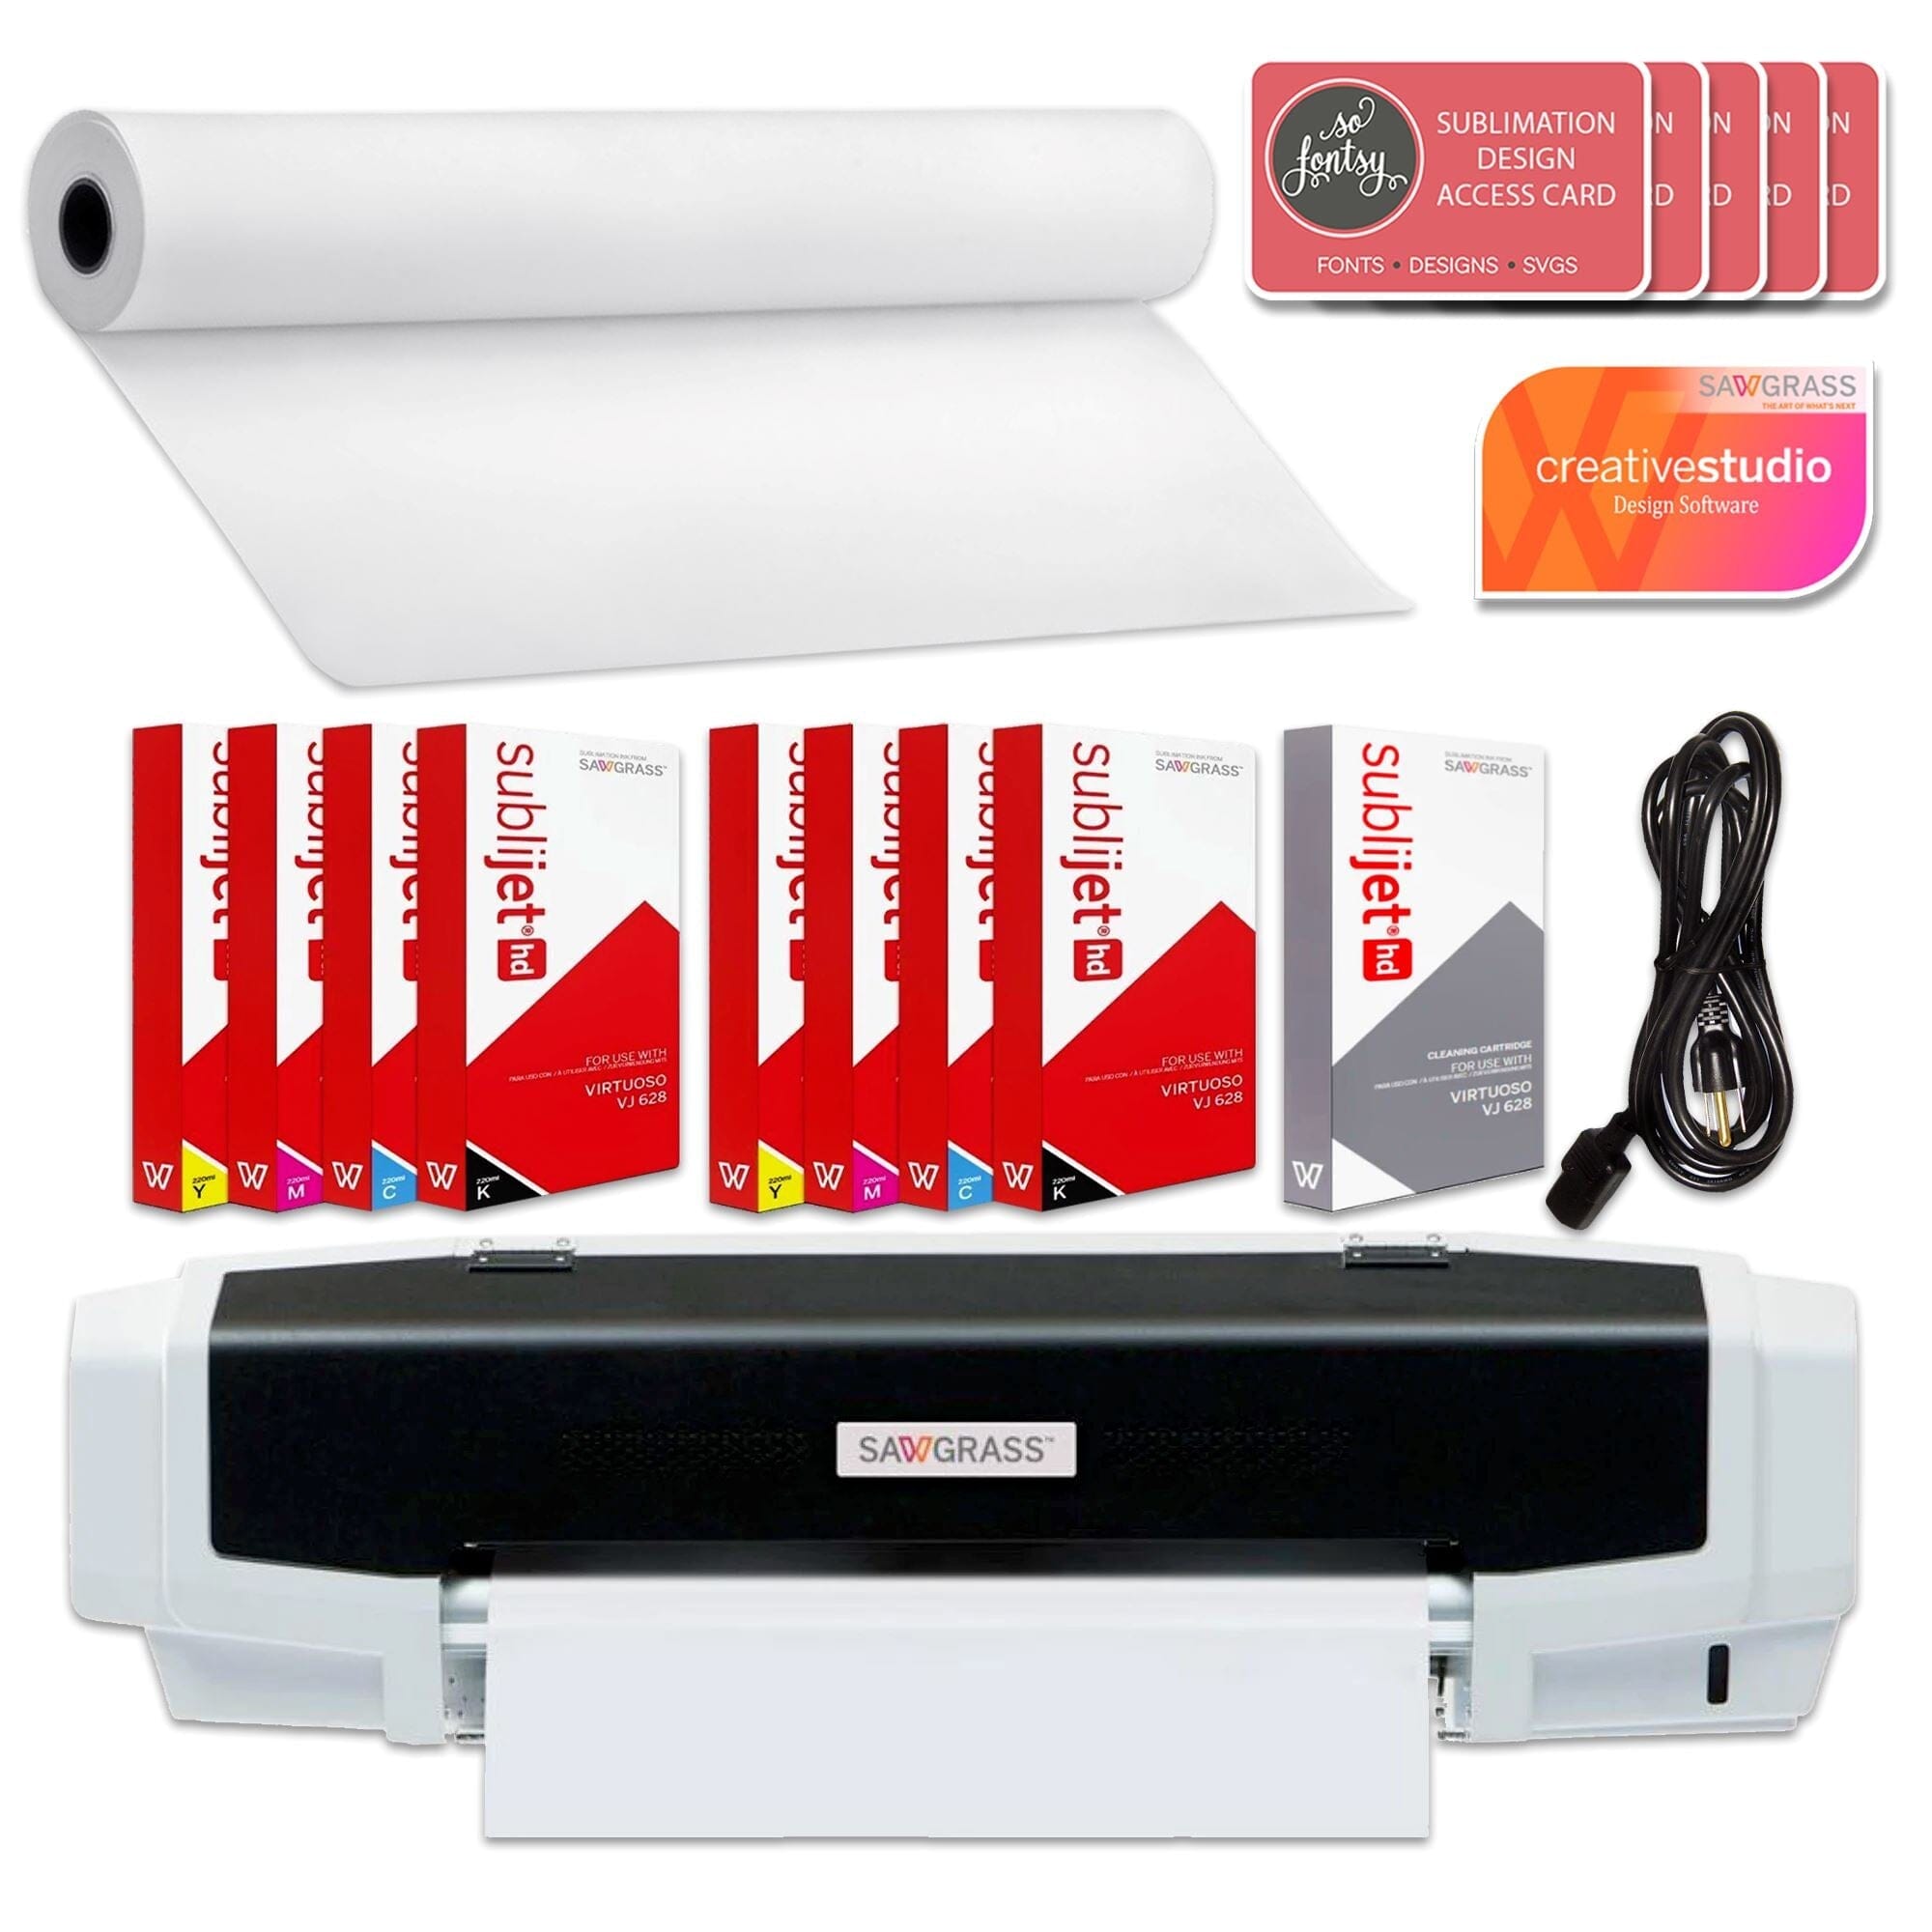 Range Sublimation accessories and tools - UK Supplier